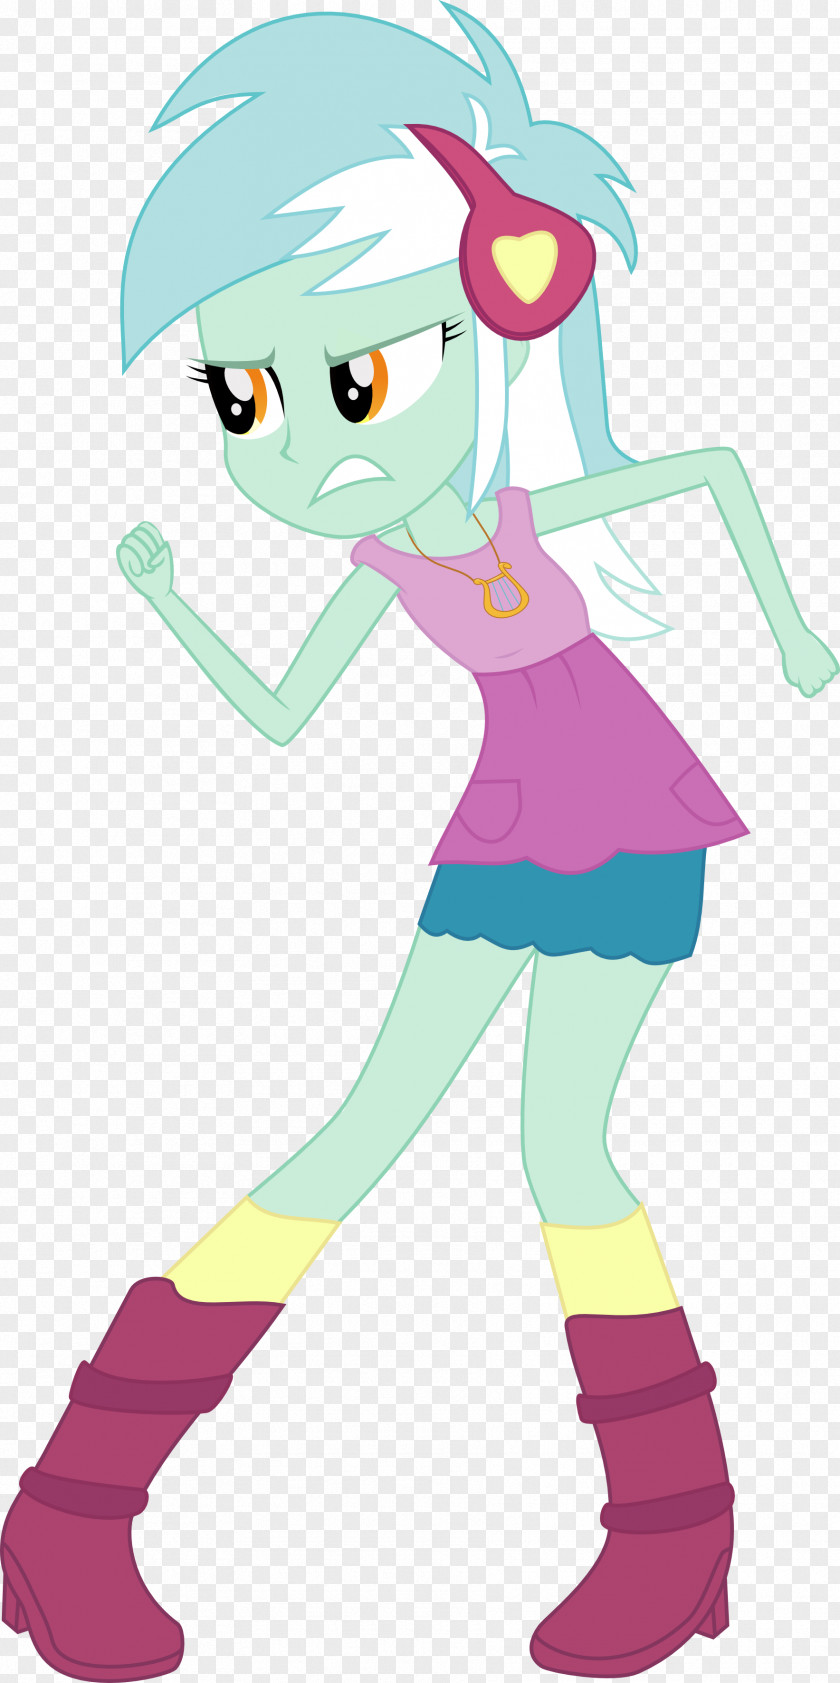 My Little Pony Pony: Equestria Girls Derpy Hooves PNG